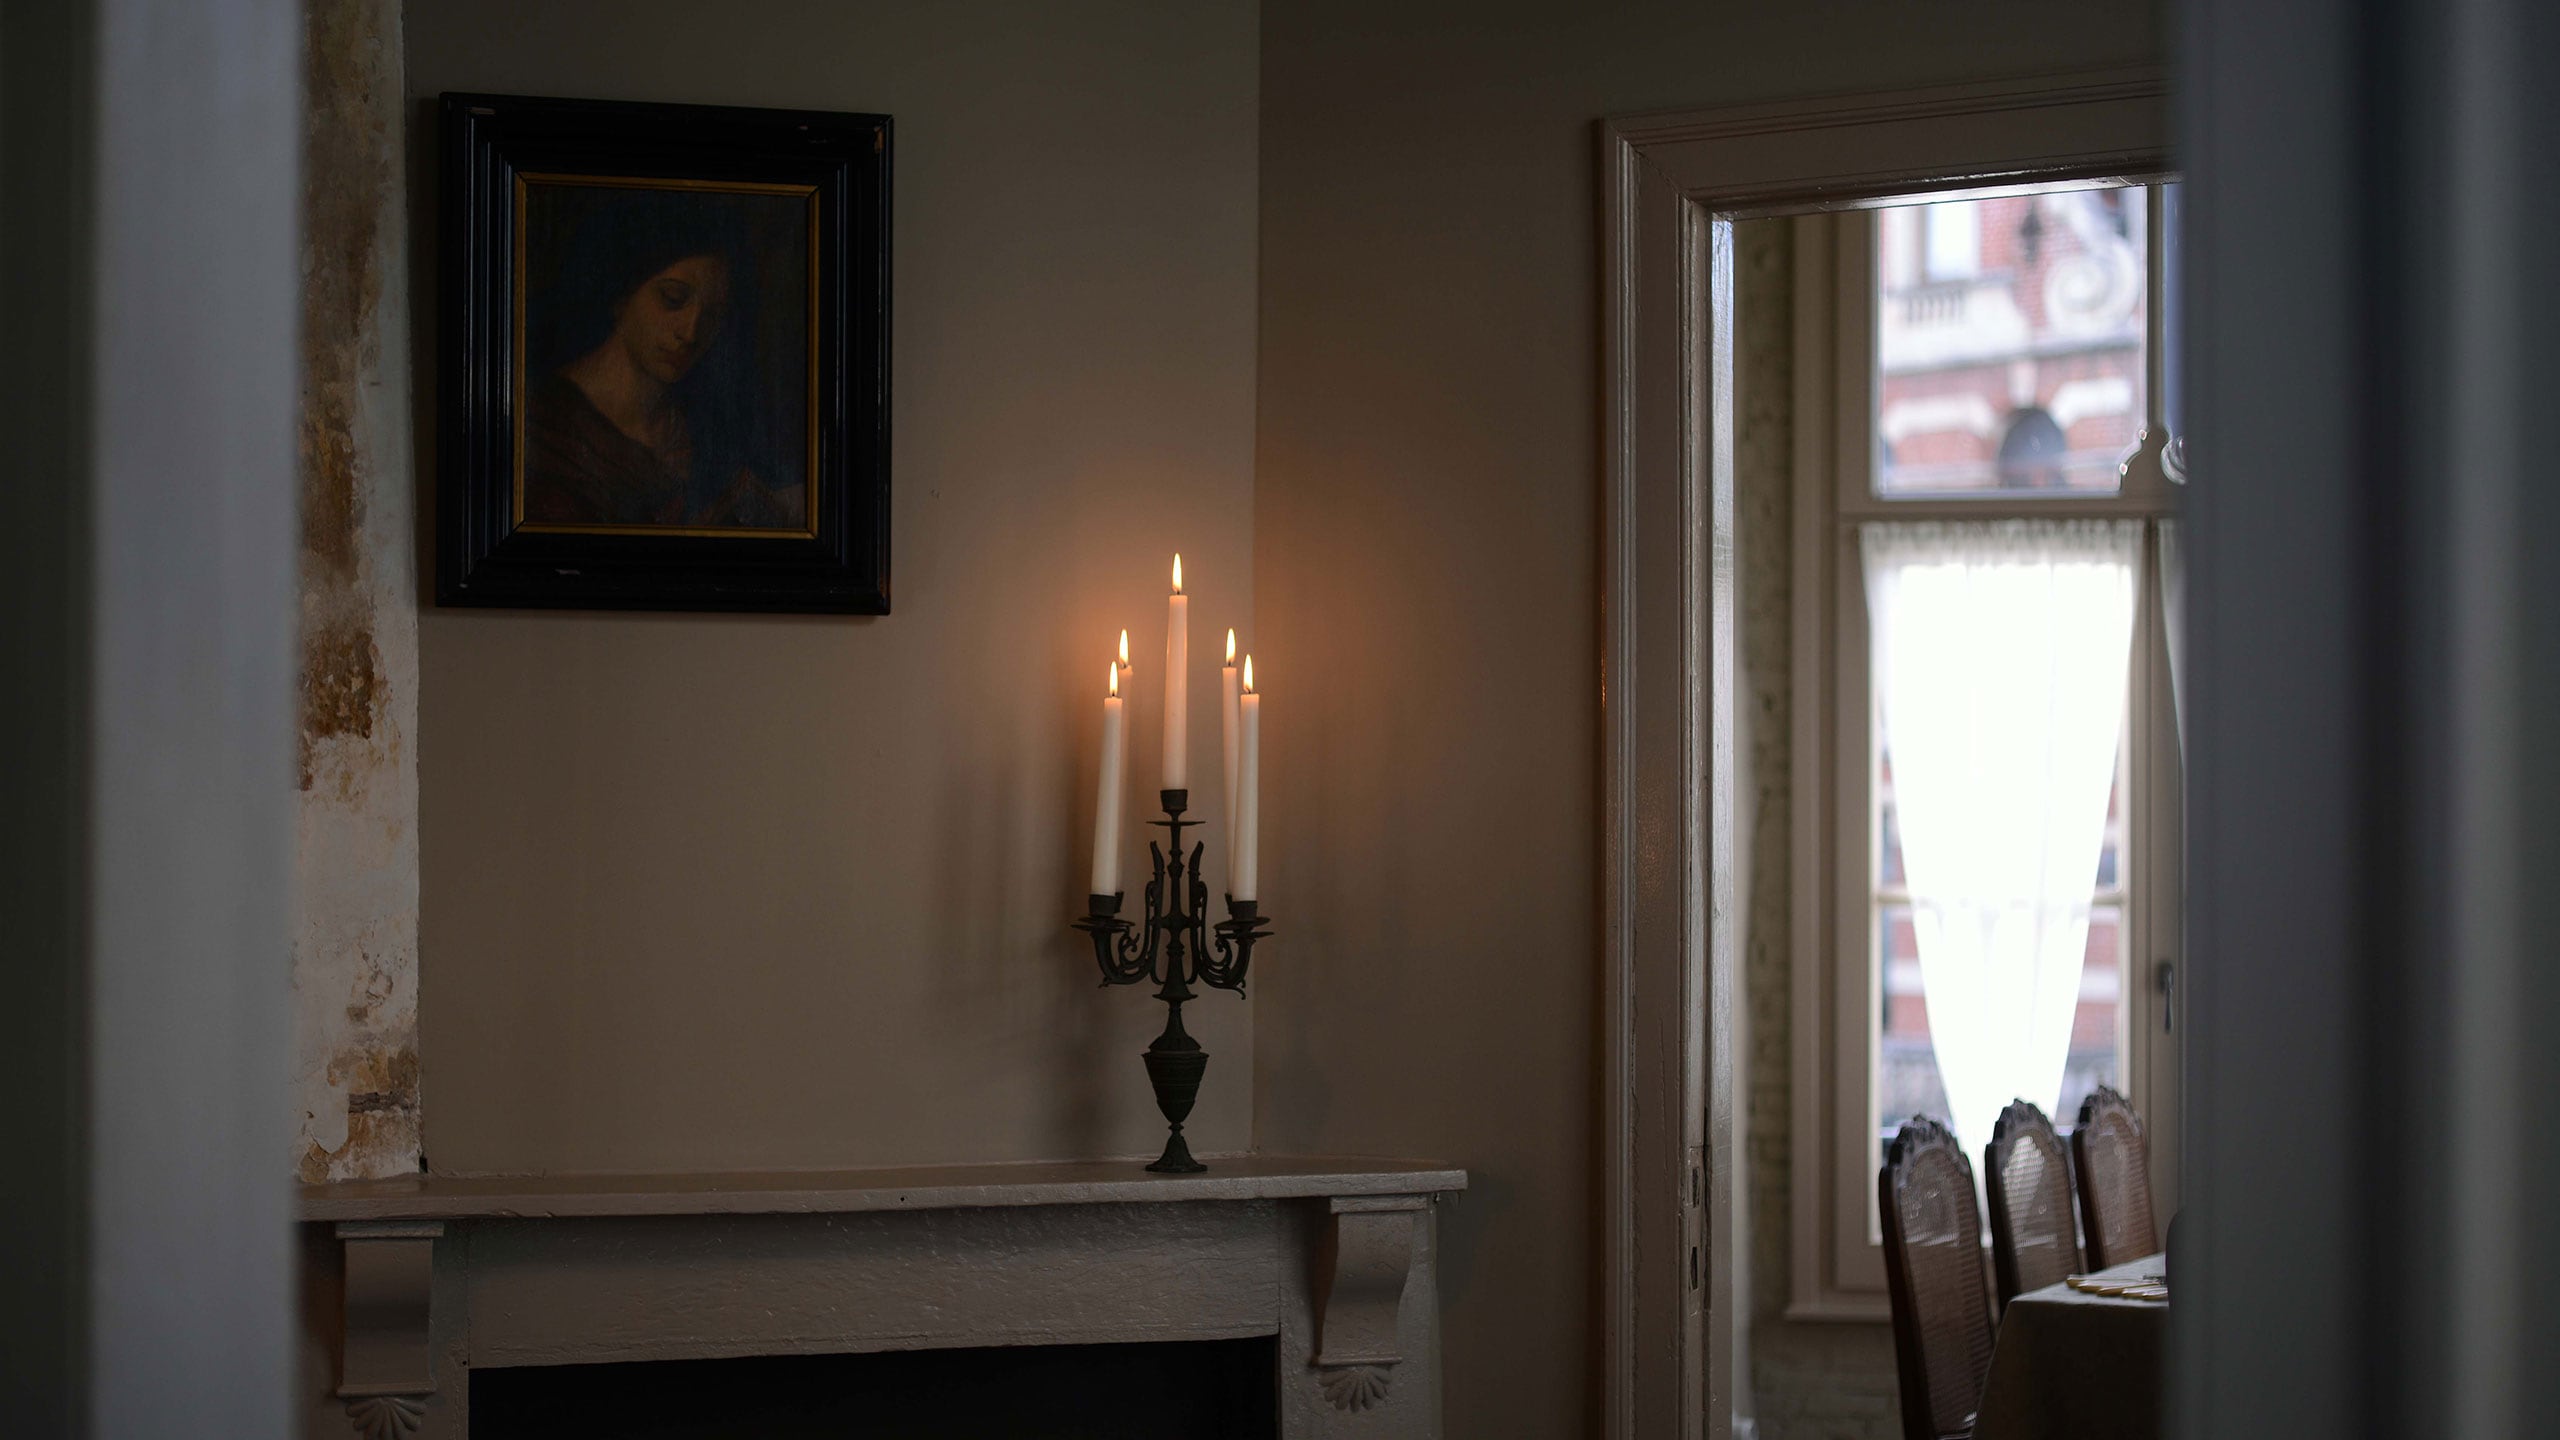 A dining room as seen from the doorway, with three lit candles in a candelabra positioned on a mantlepiece.